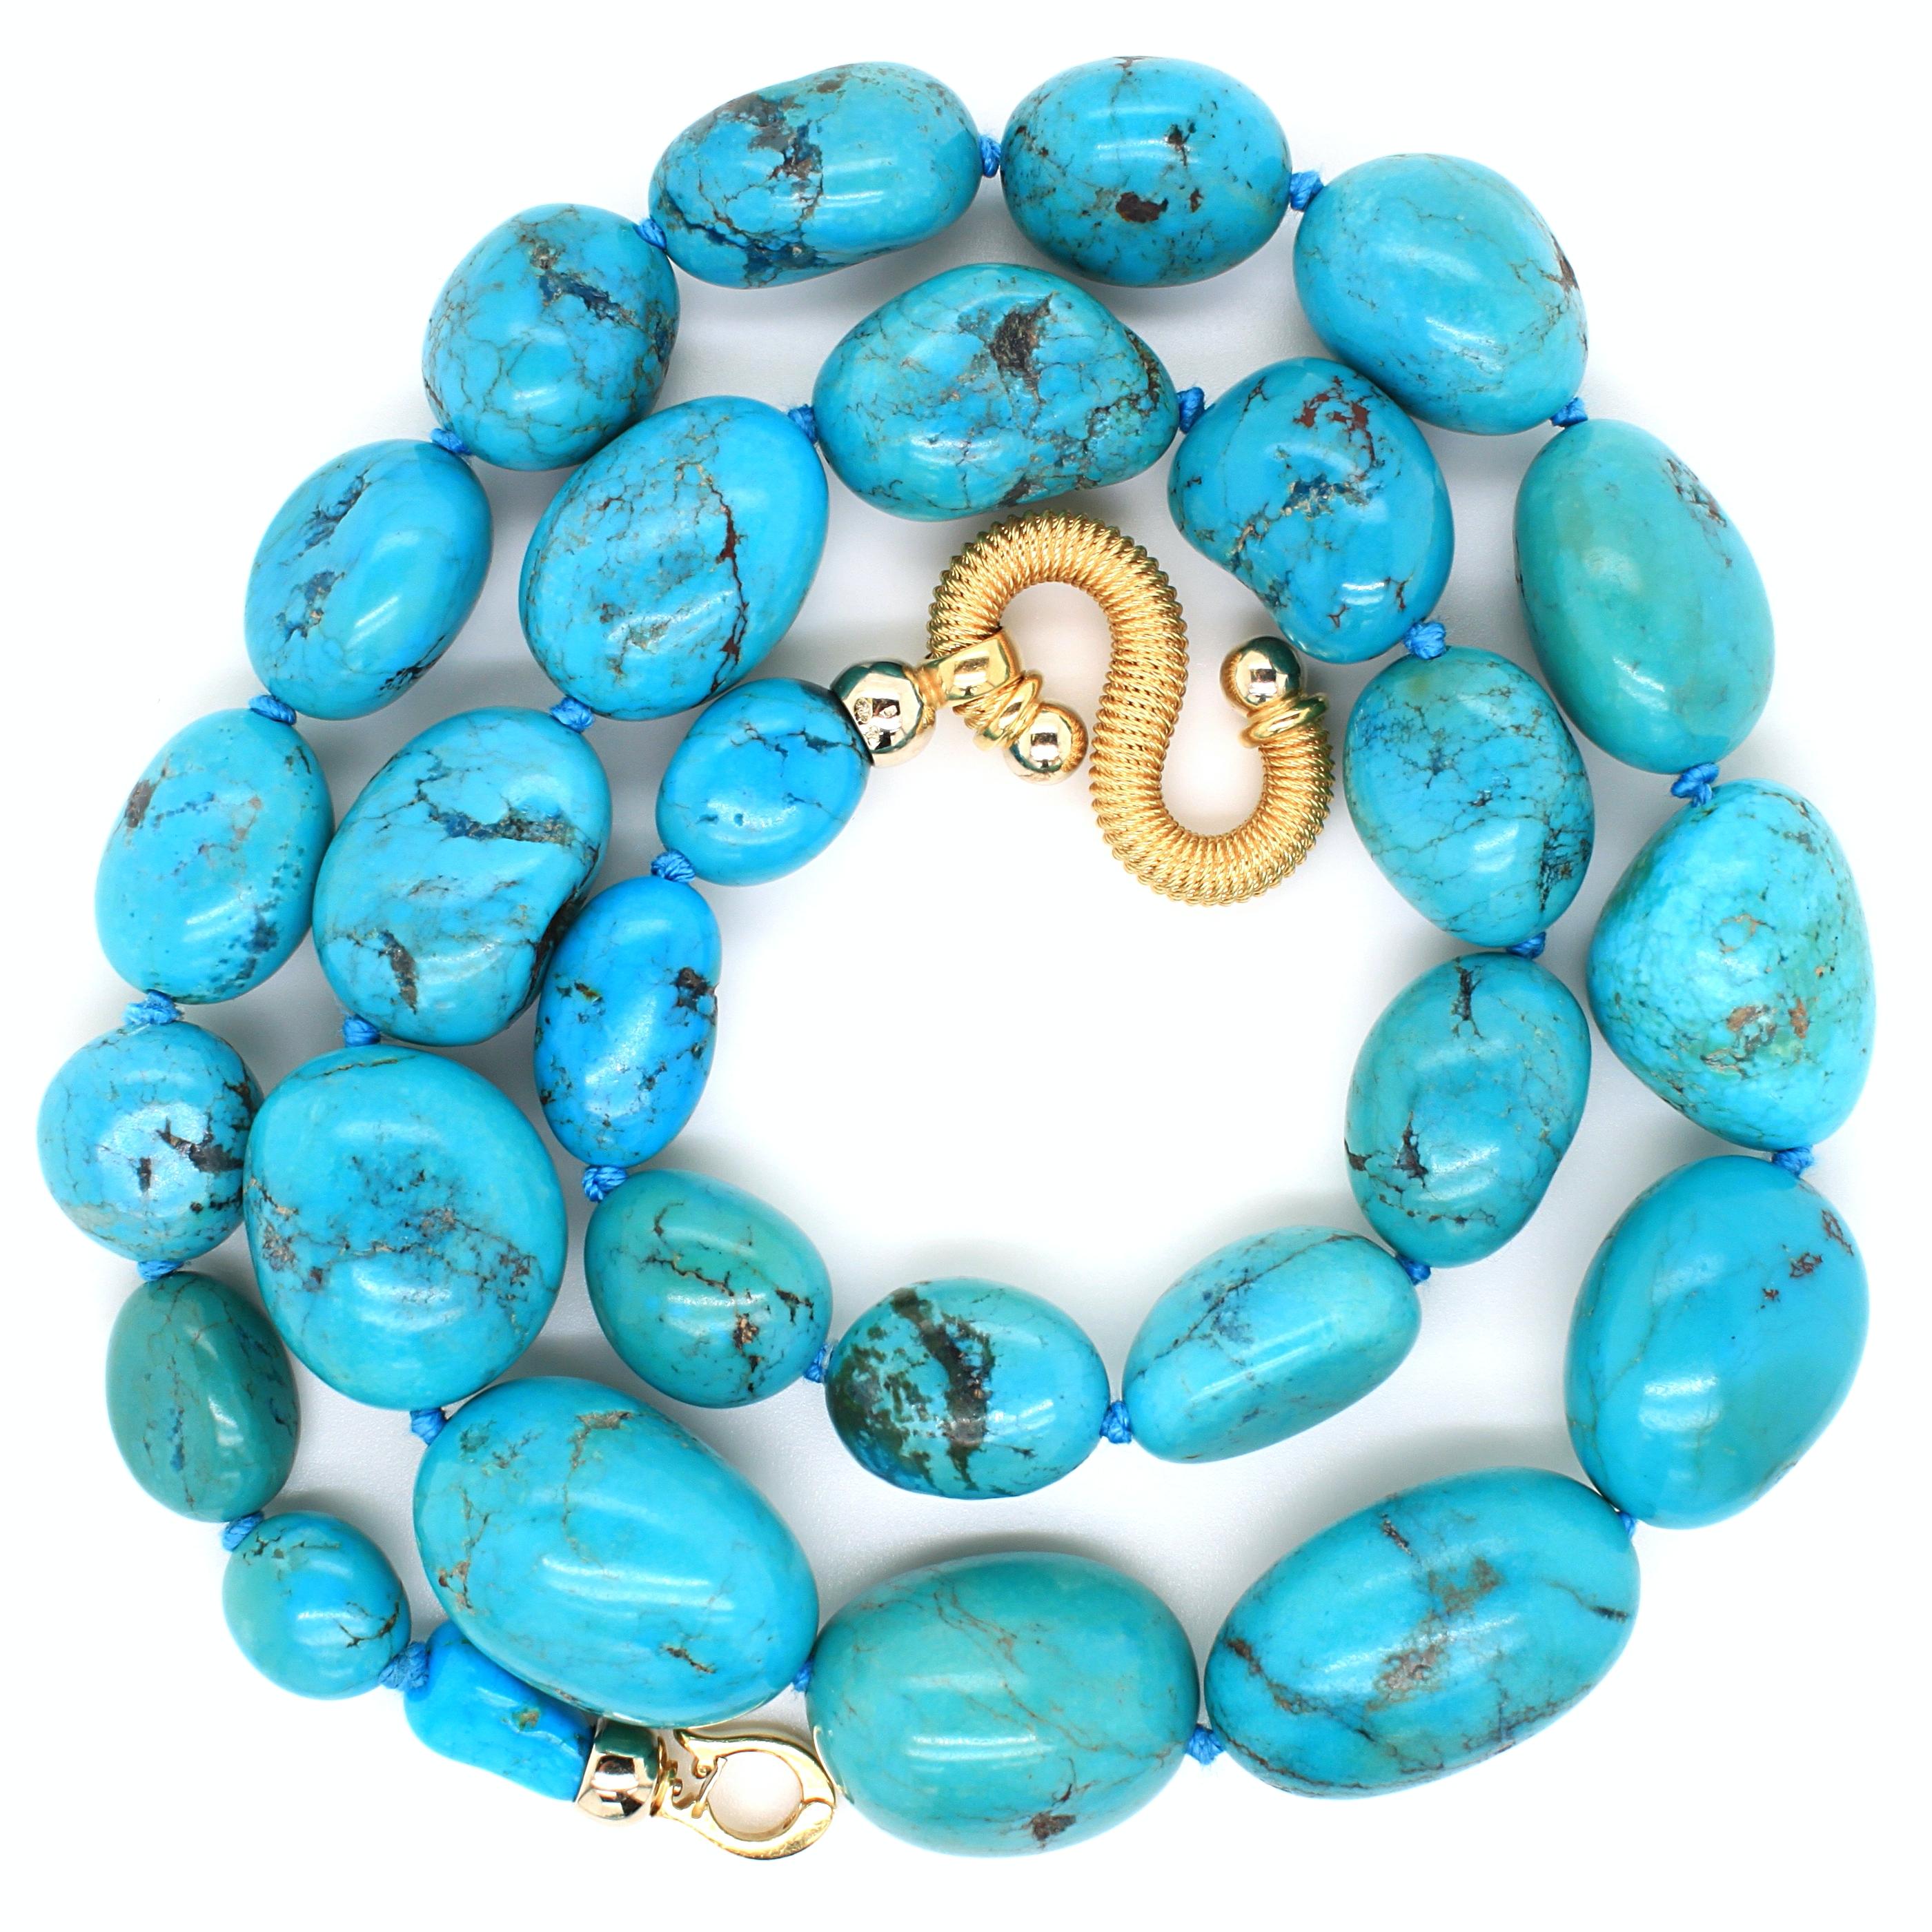 A turquoise bead necklace with a 18k yellow gold clasp. The necklaces comprises 28 graduating Persian turquoise beads with a beautiful and harmonious colour. Each individual turquoise features a unique natural matrix. 
The yellow gold clasp is